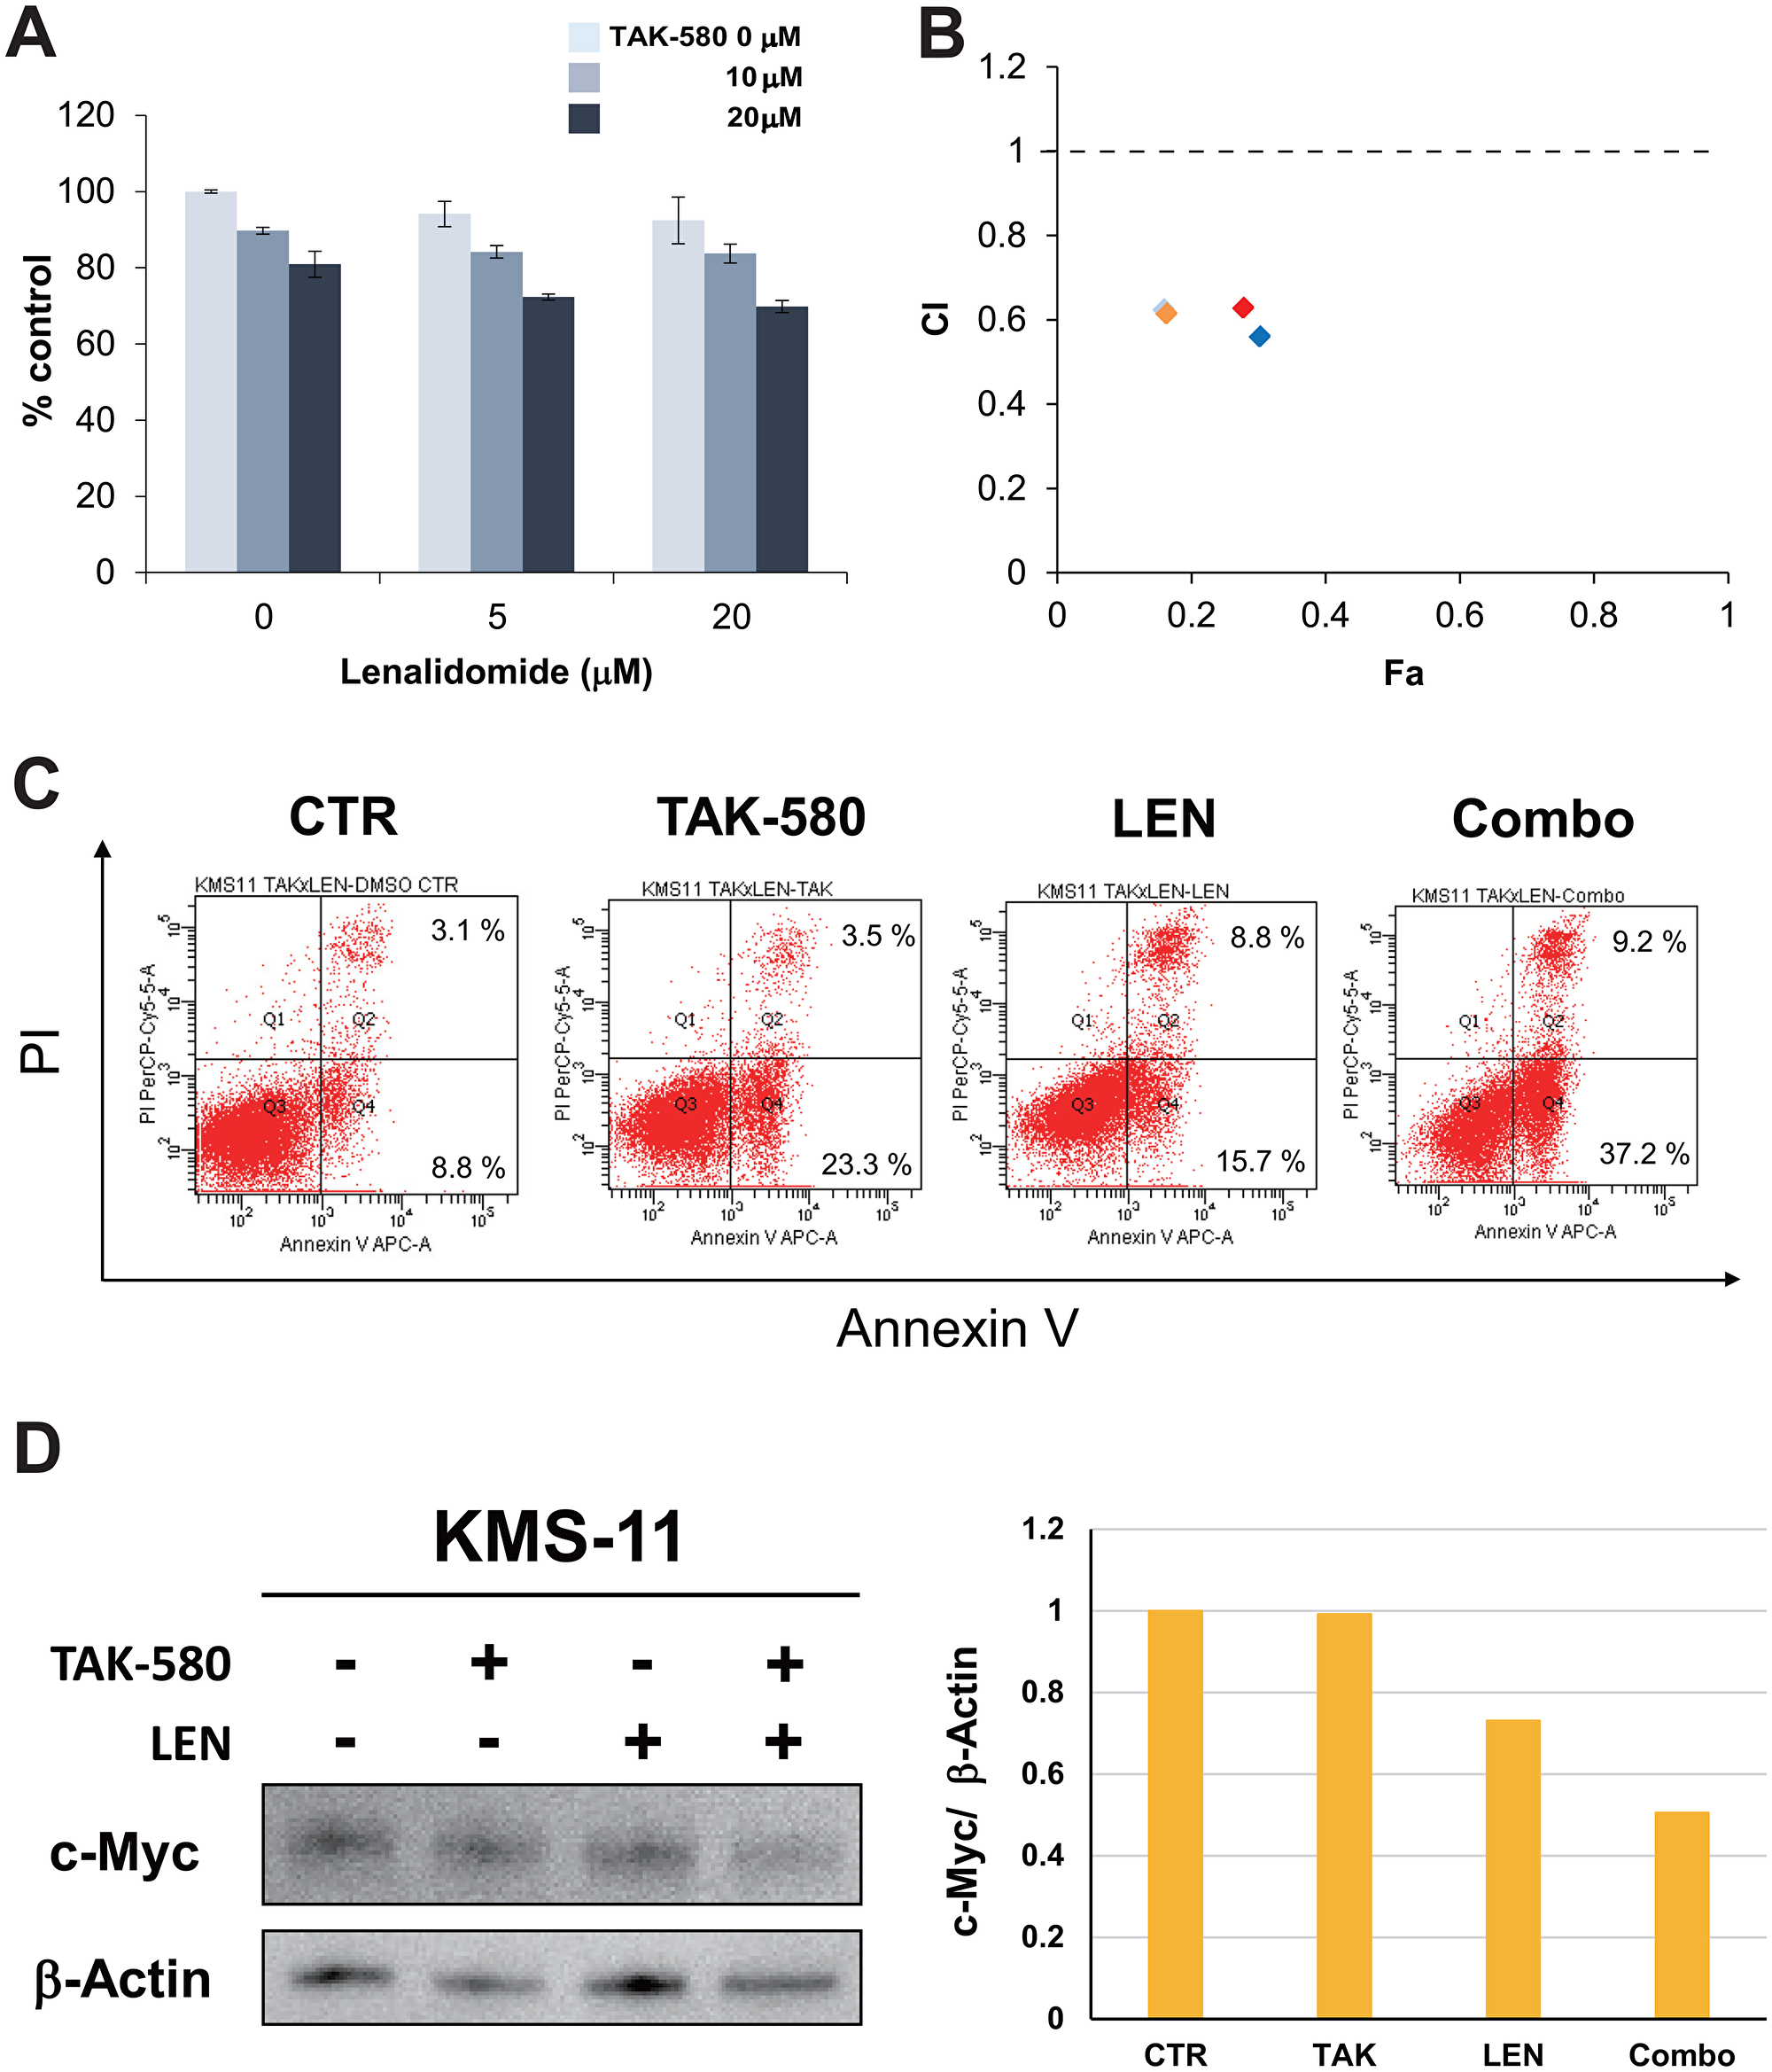 TAK-580 induces synergistic cytotoxicity with lenalidomide (LEN) in MM cells.